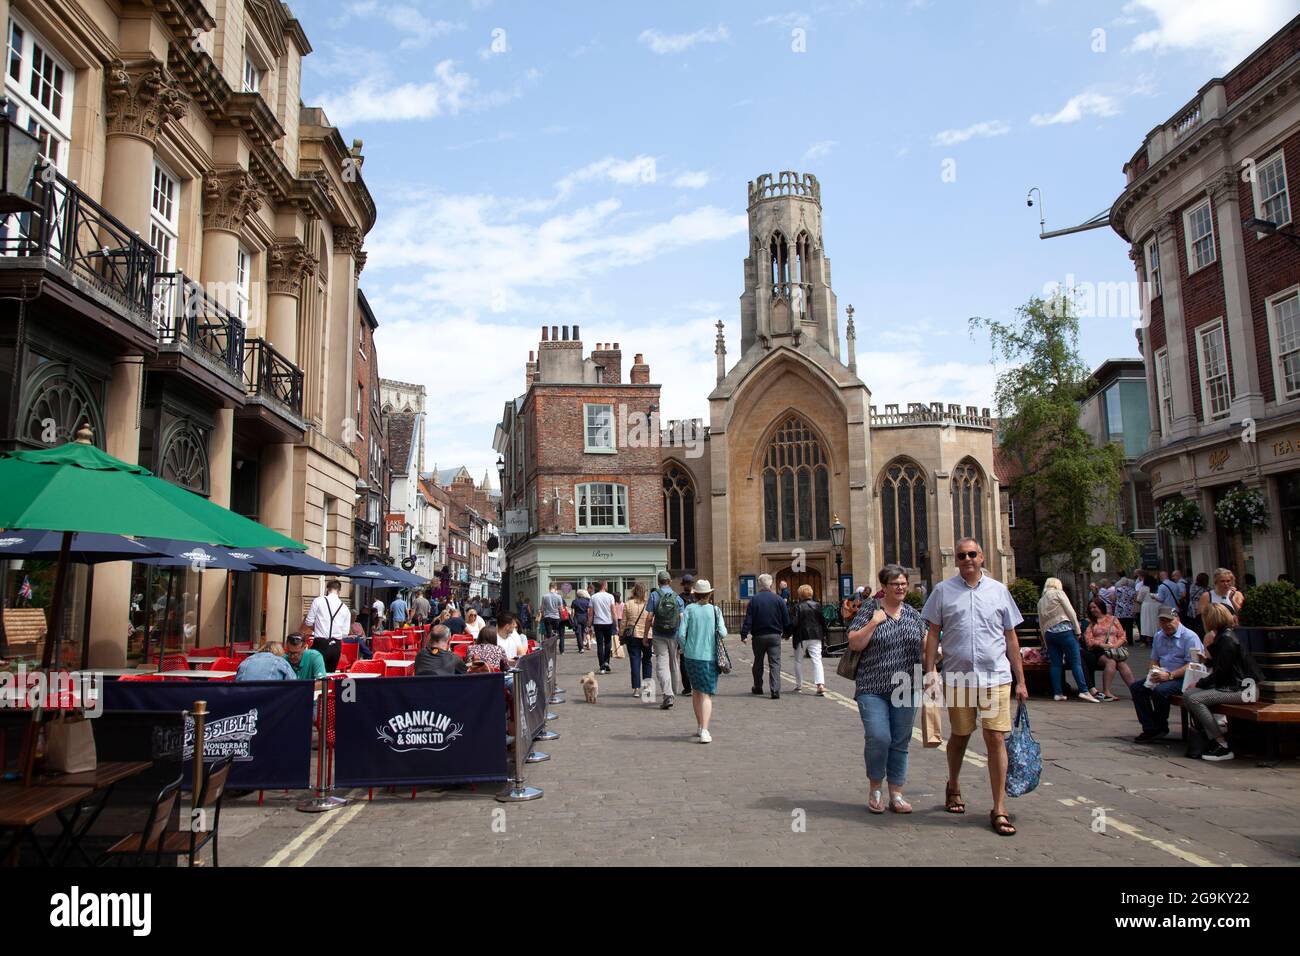 St Helen's Square and Church in York, UK Stock Photo